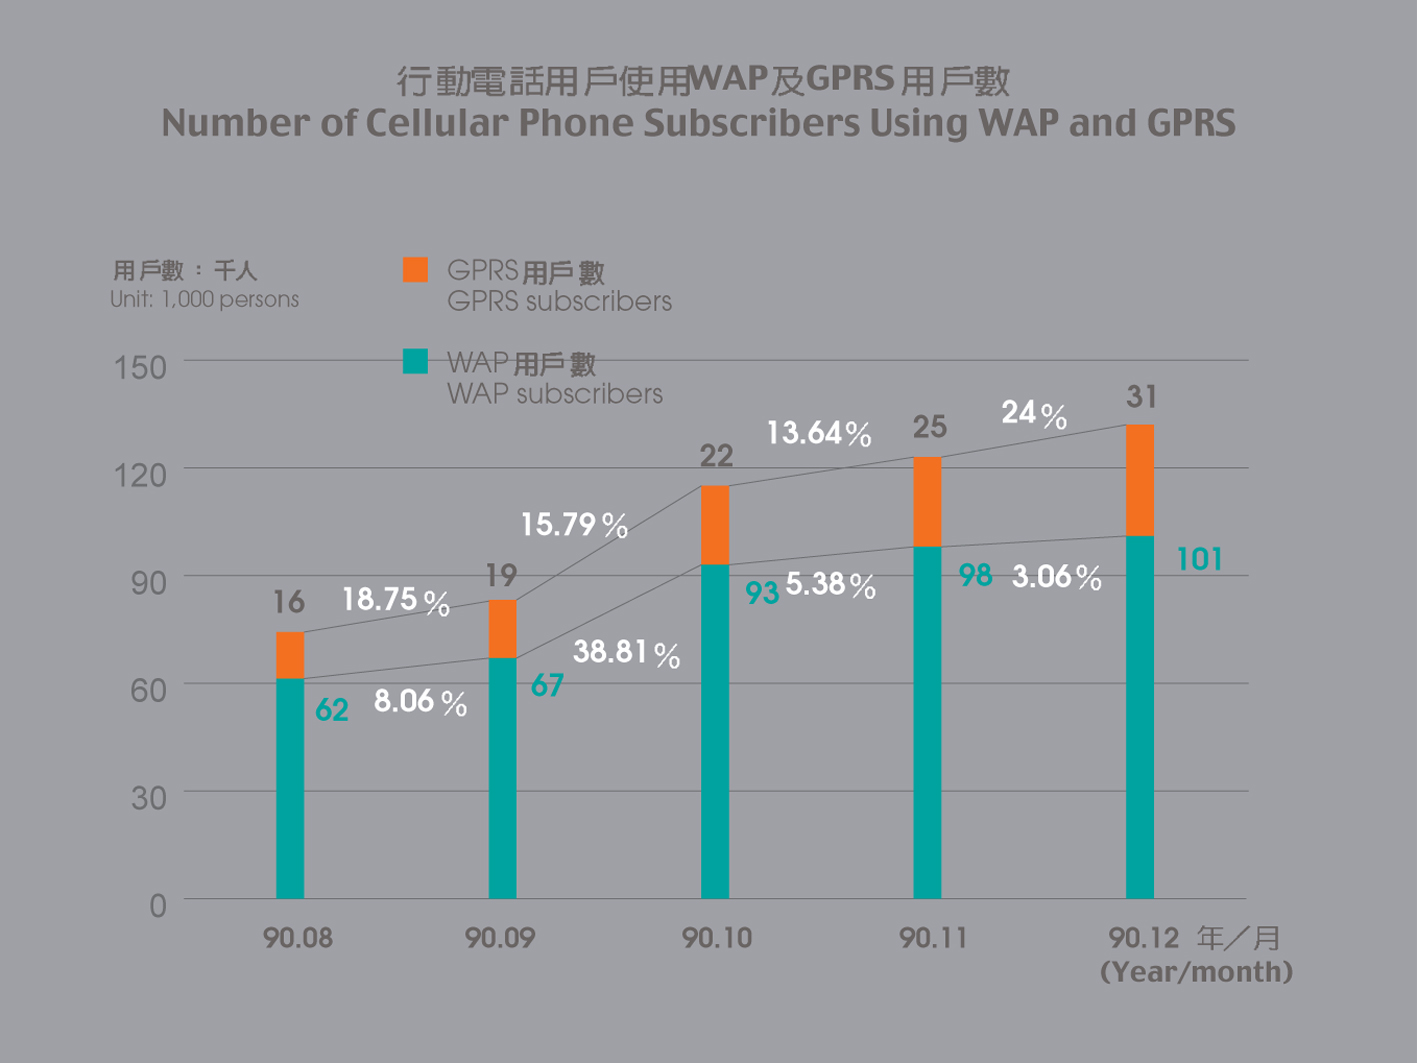 Number of Cellular Phone Subscribers Using WAP and GPRS